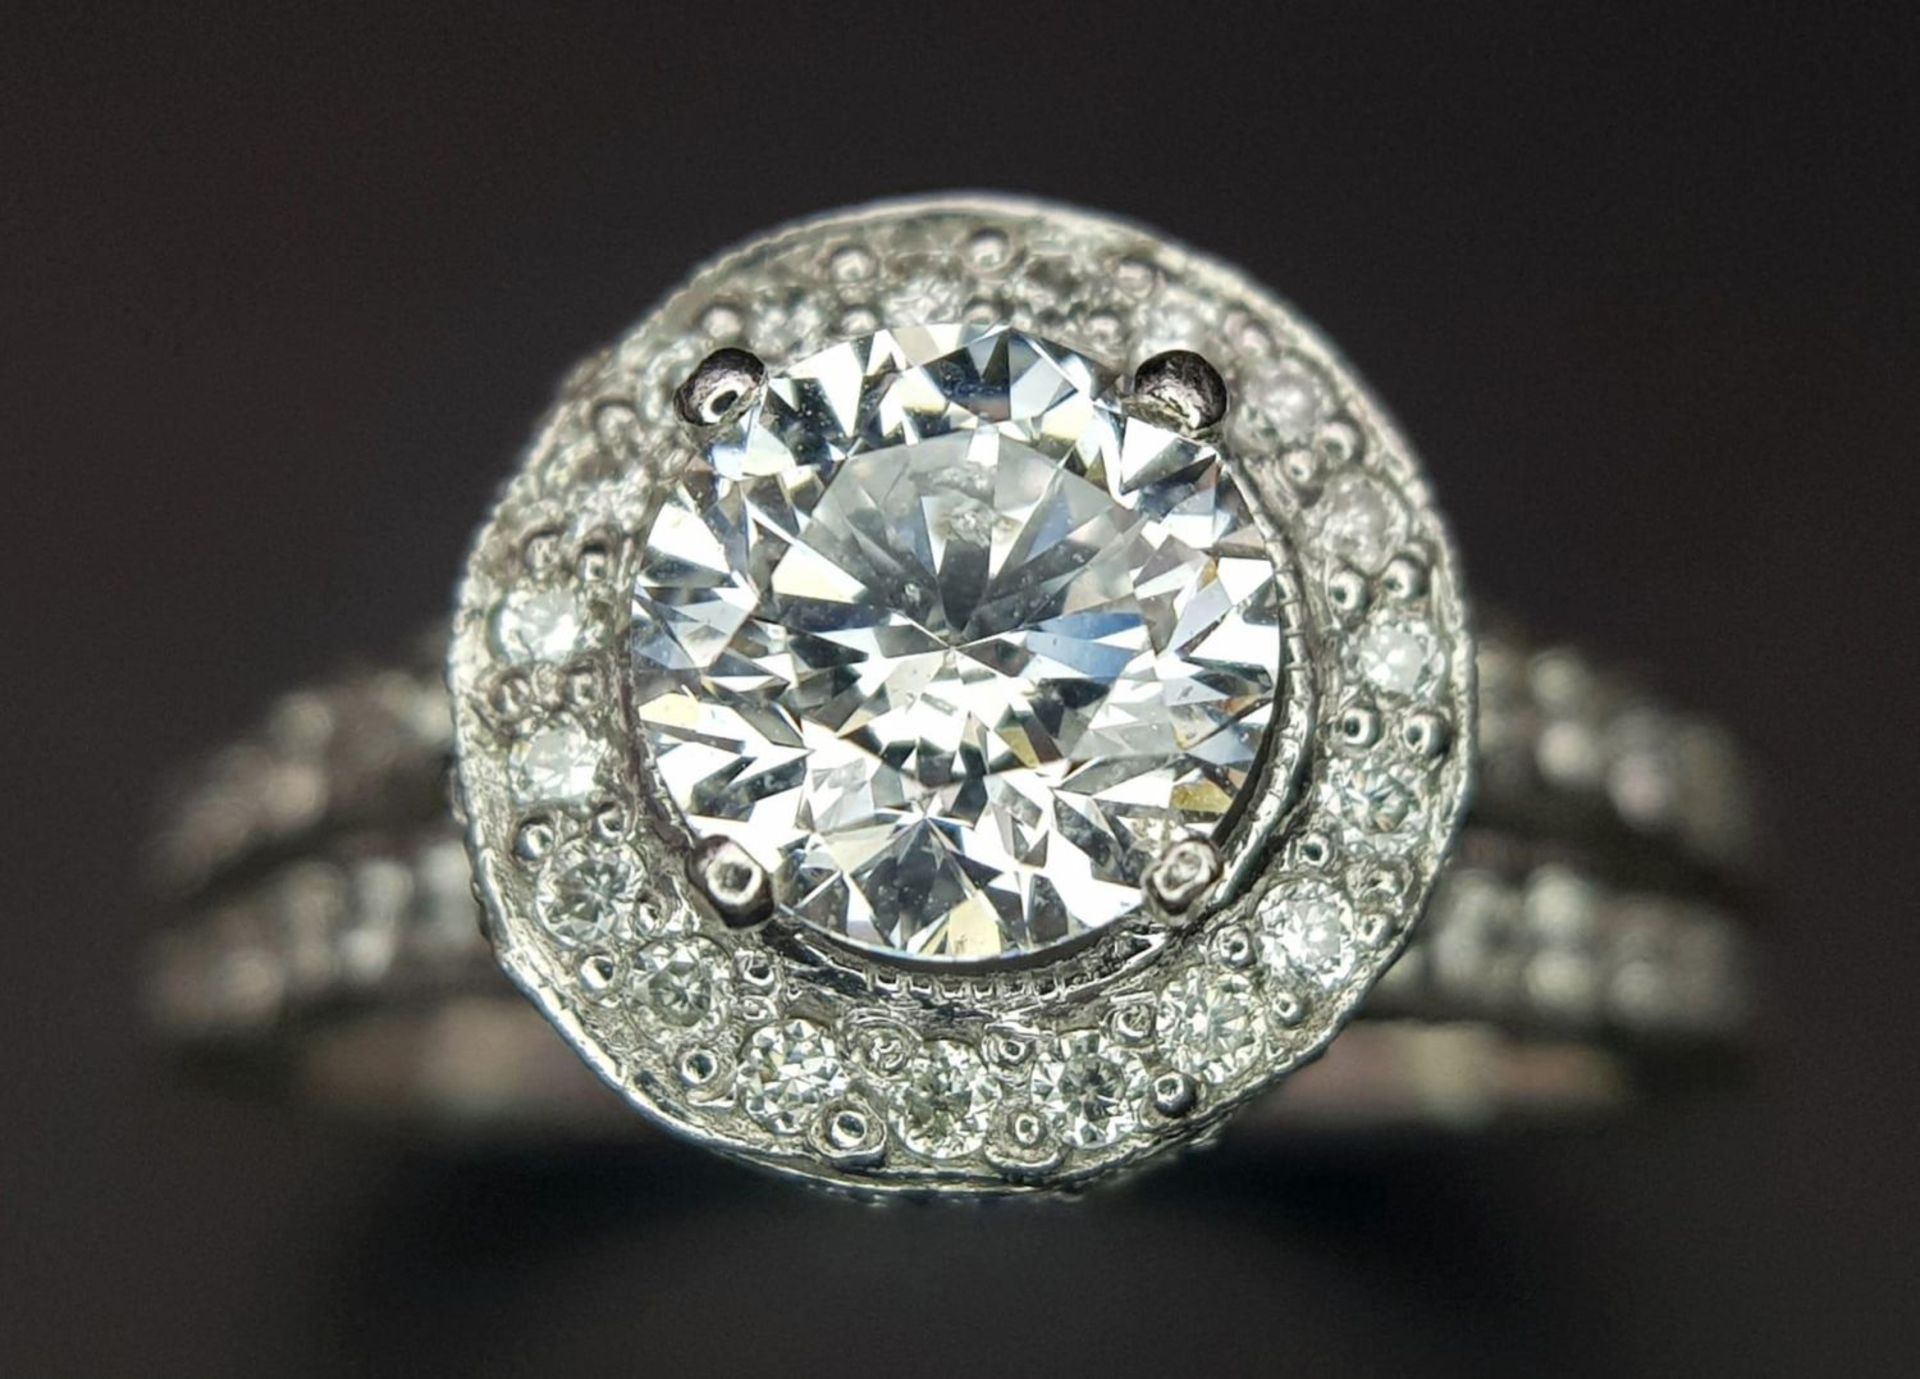 An 18 K white gold ring with a brilliant cut diamond (1.01 carats) surrounded by diamonds on the top - Image 11 of 22